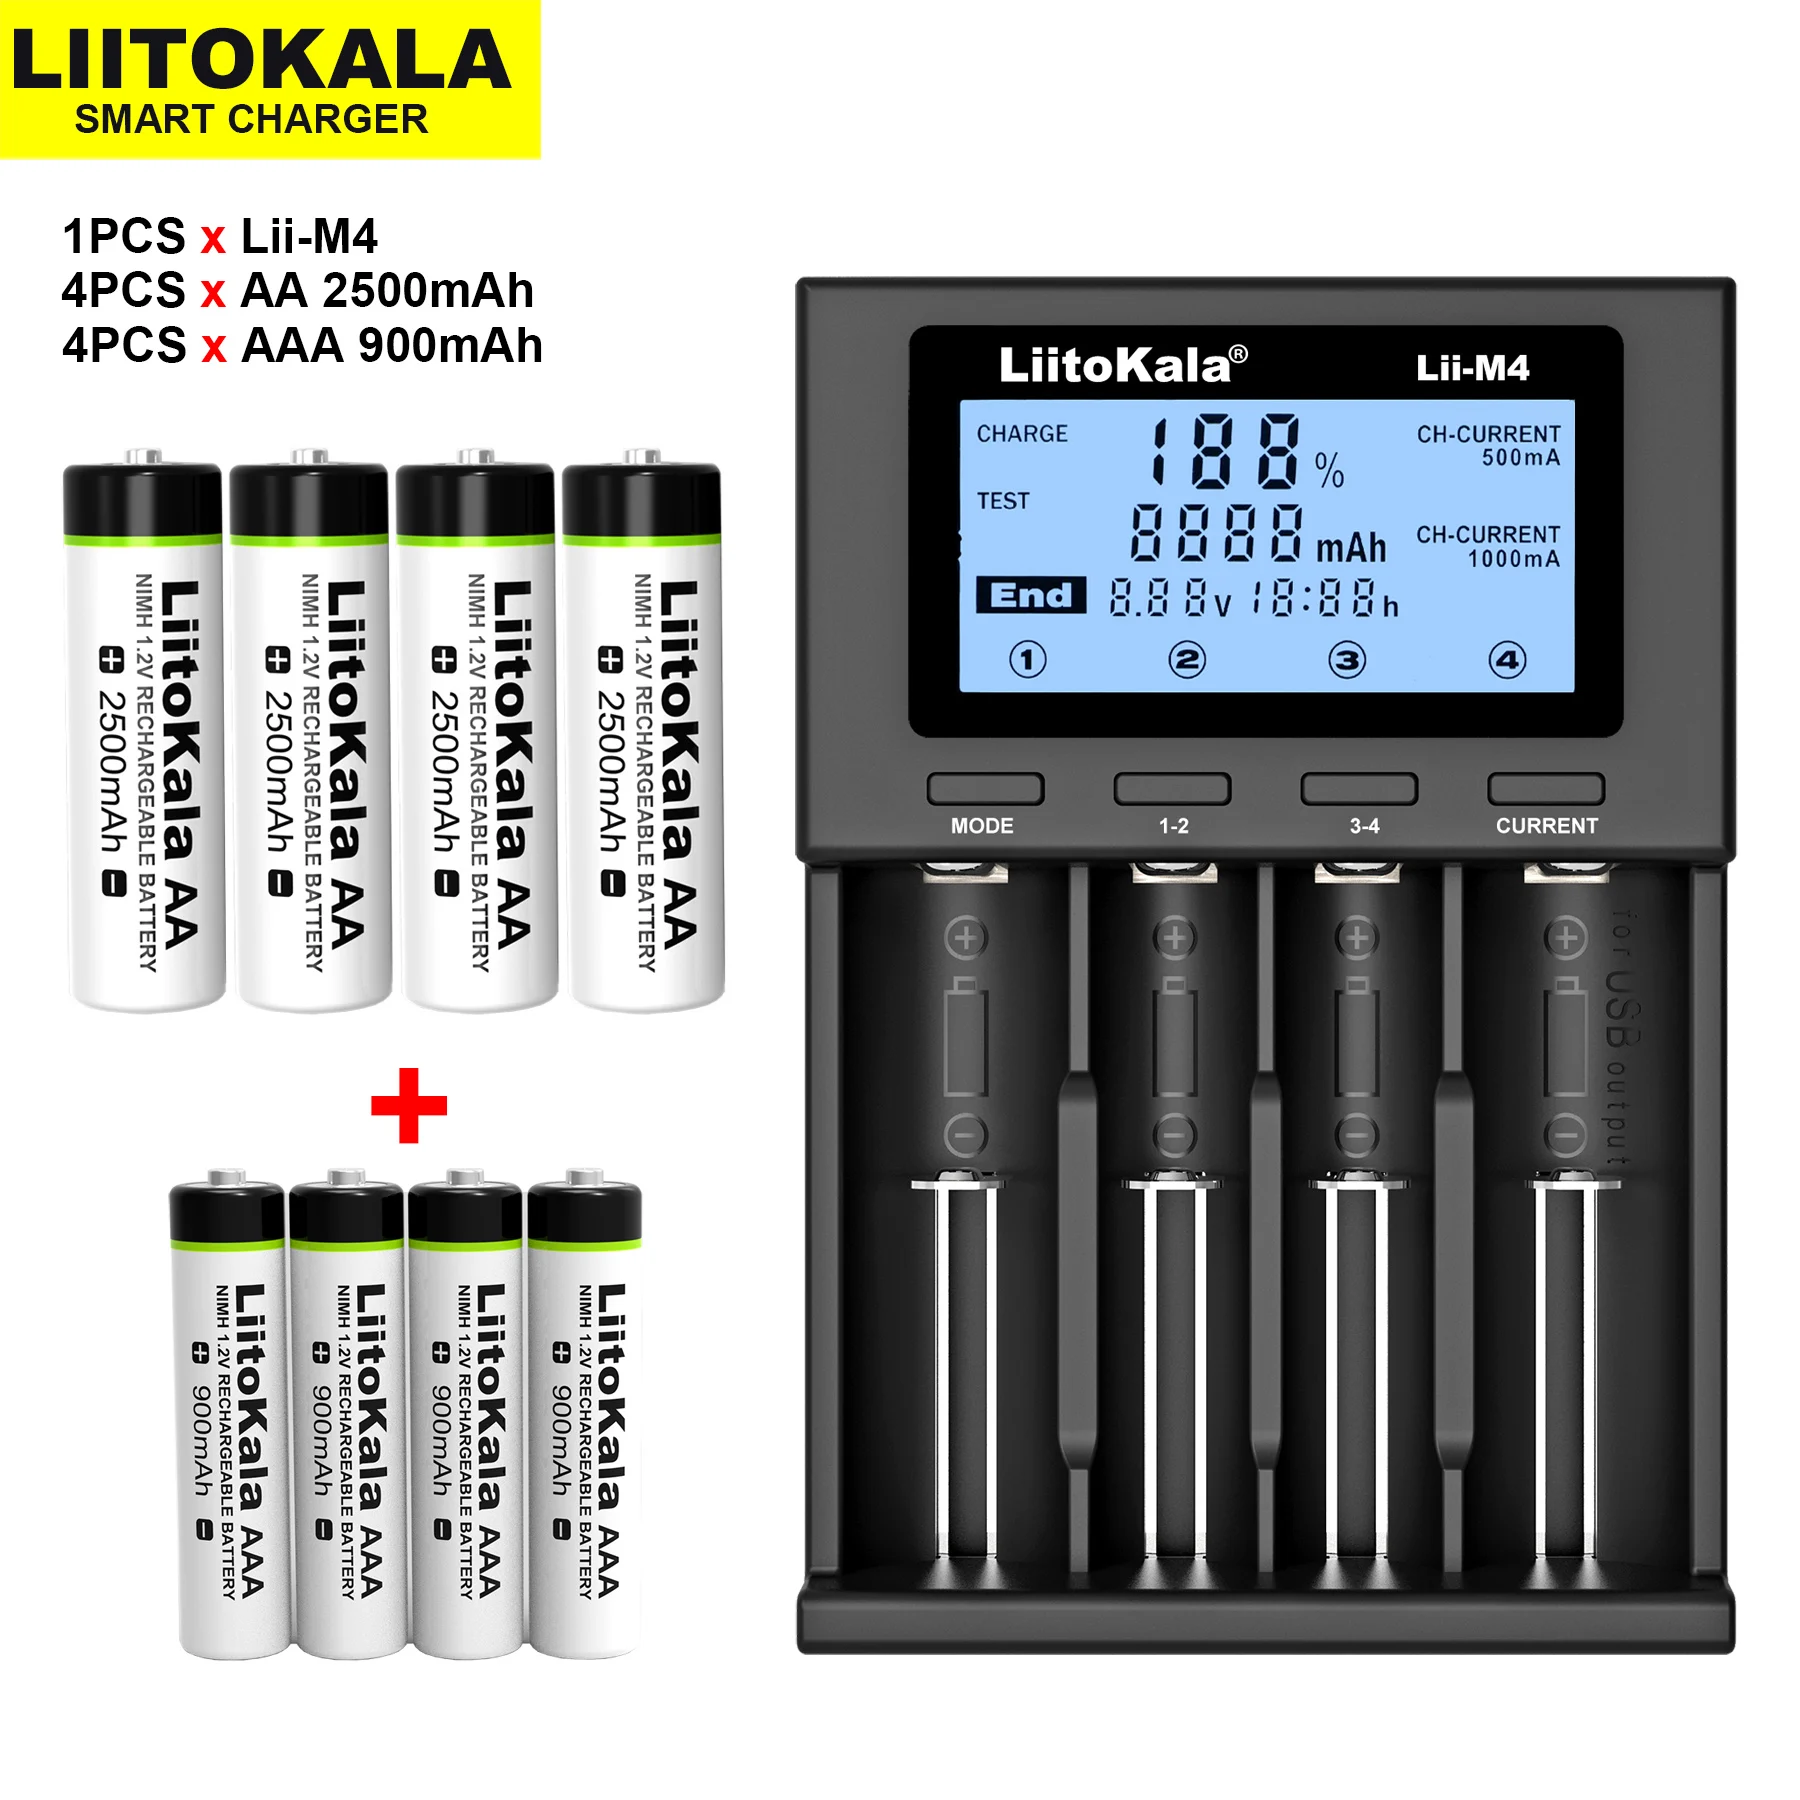 

LiitoKala AA 2500mAh AAA 900mAh 1.2V NiMH Rechargeable Battery Suitable for Toys, Mice, Electronic Scales, Etc+Lii-M4 Charger